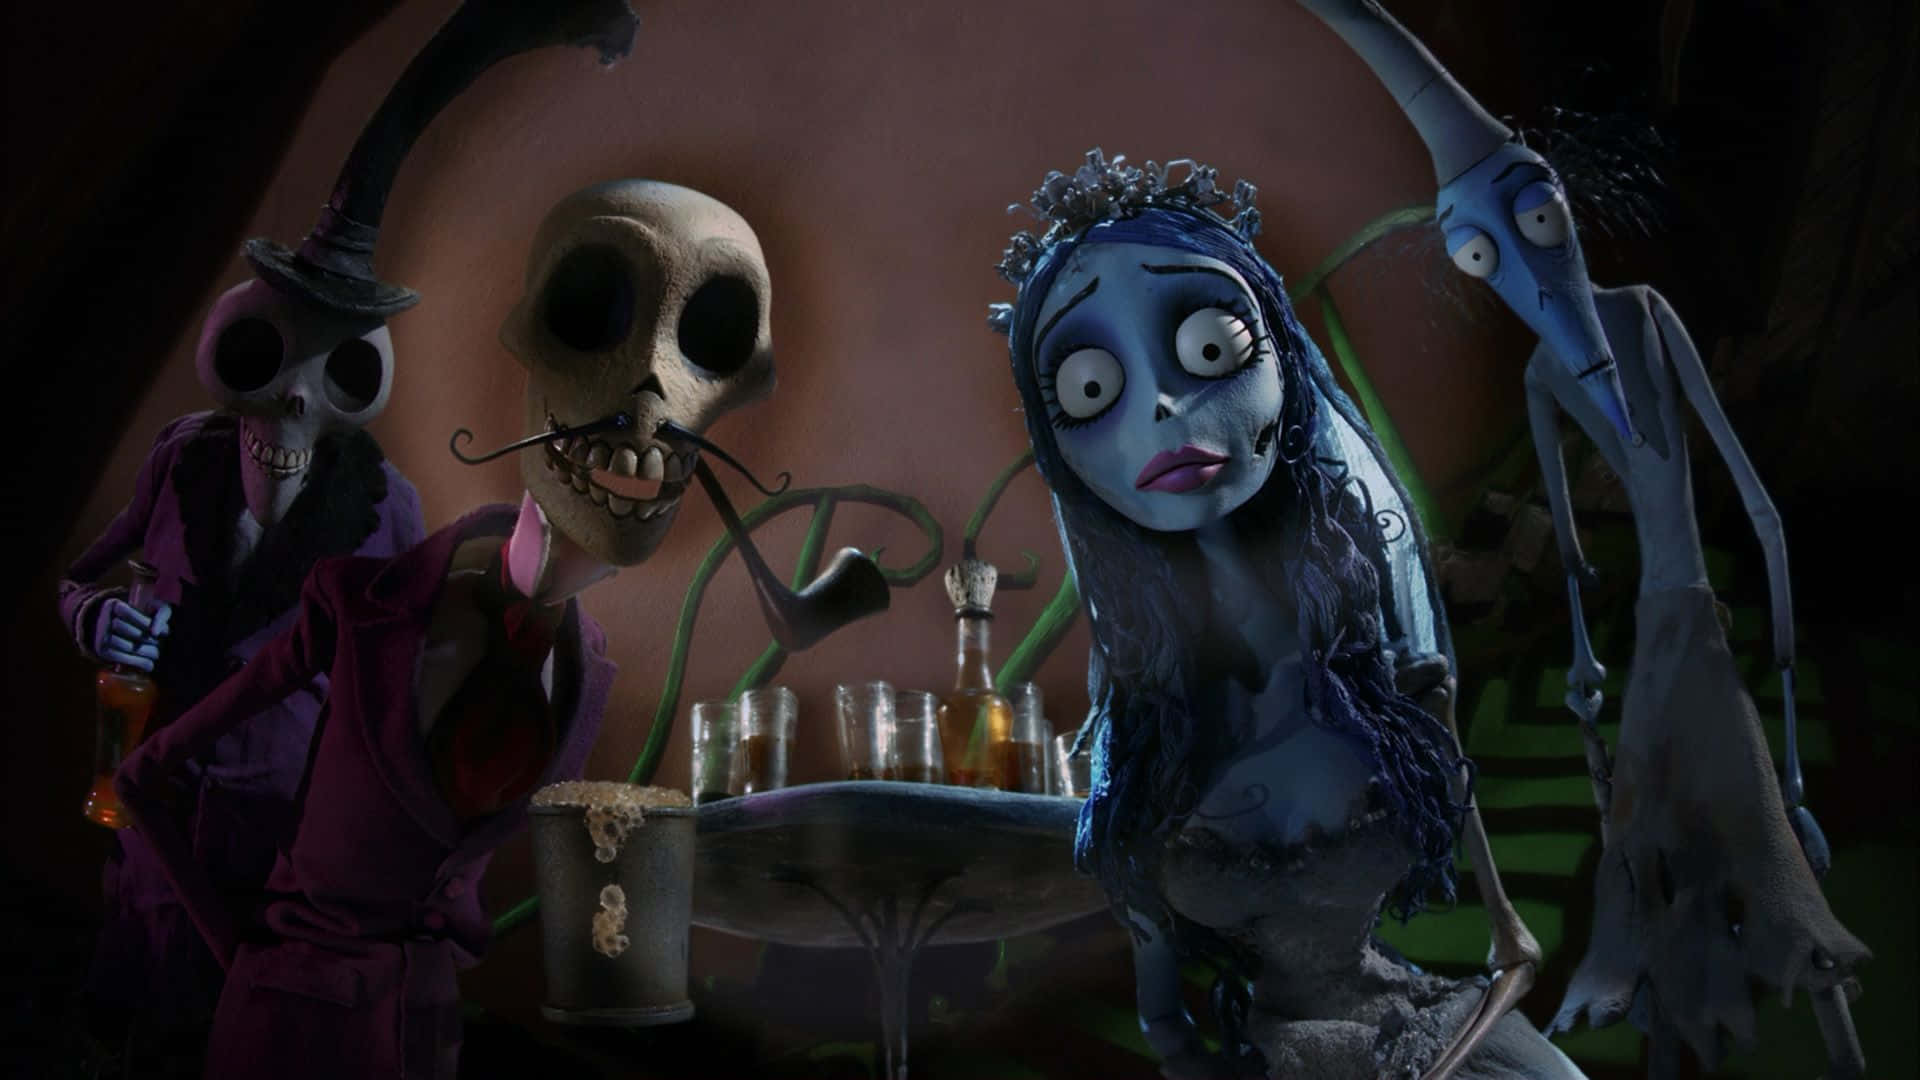 Enchanting Corpse Bride and Her Groom